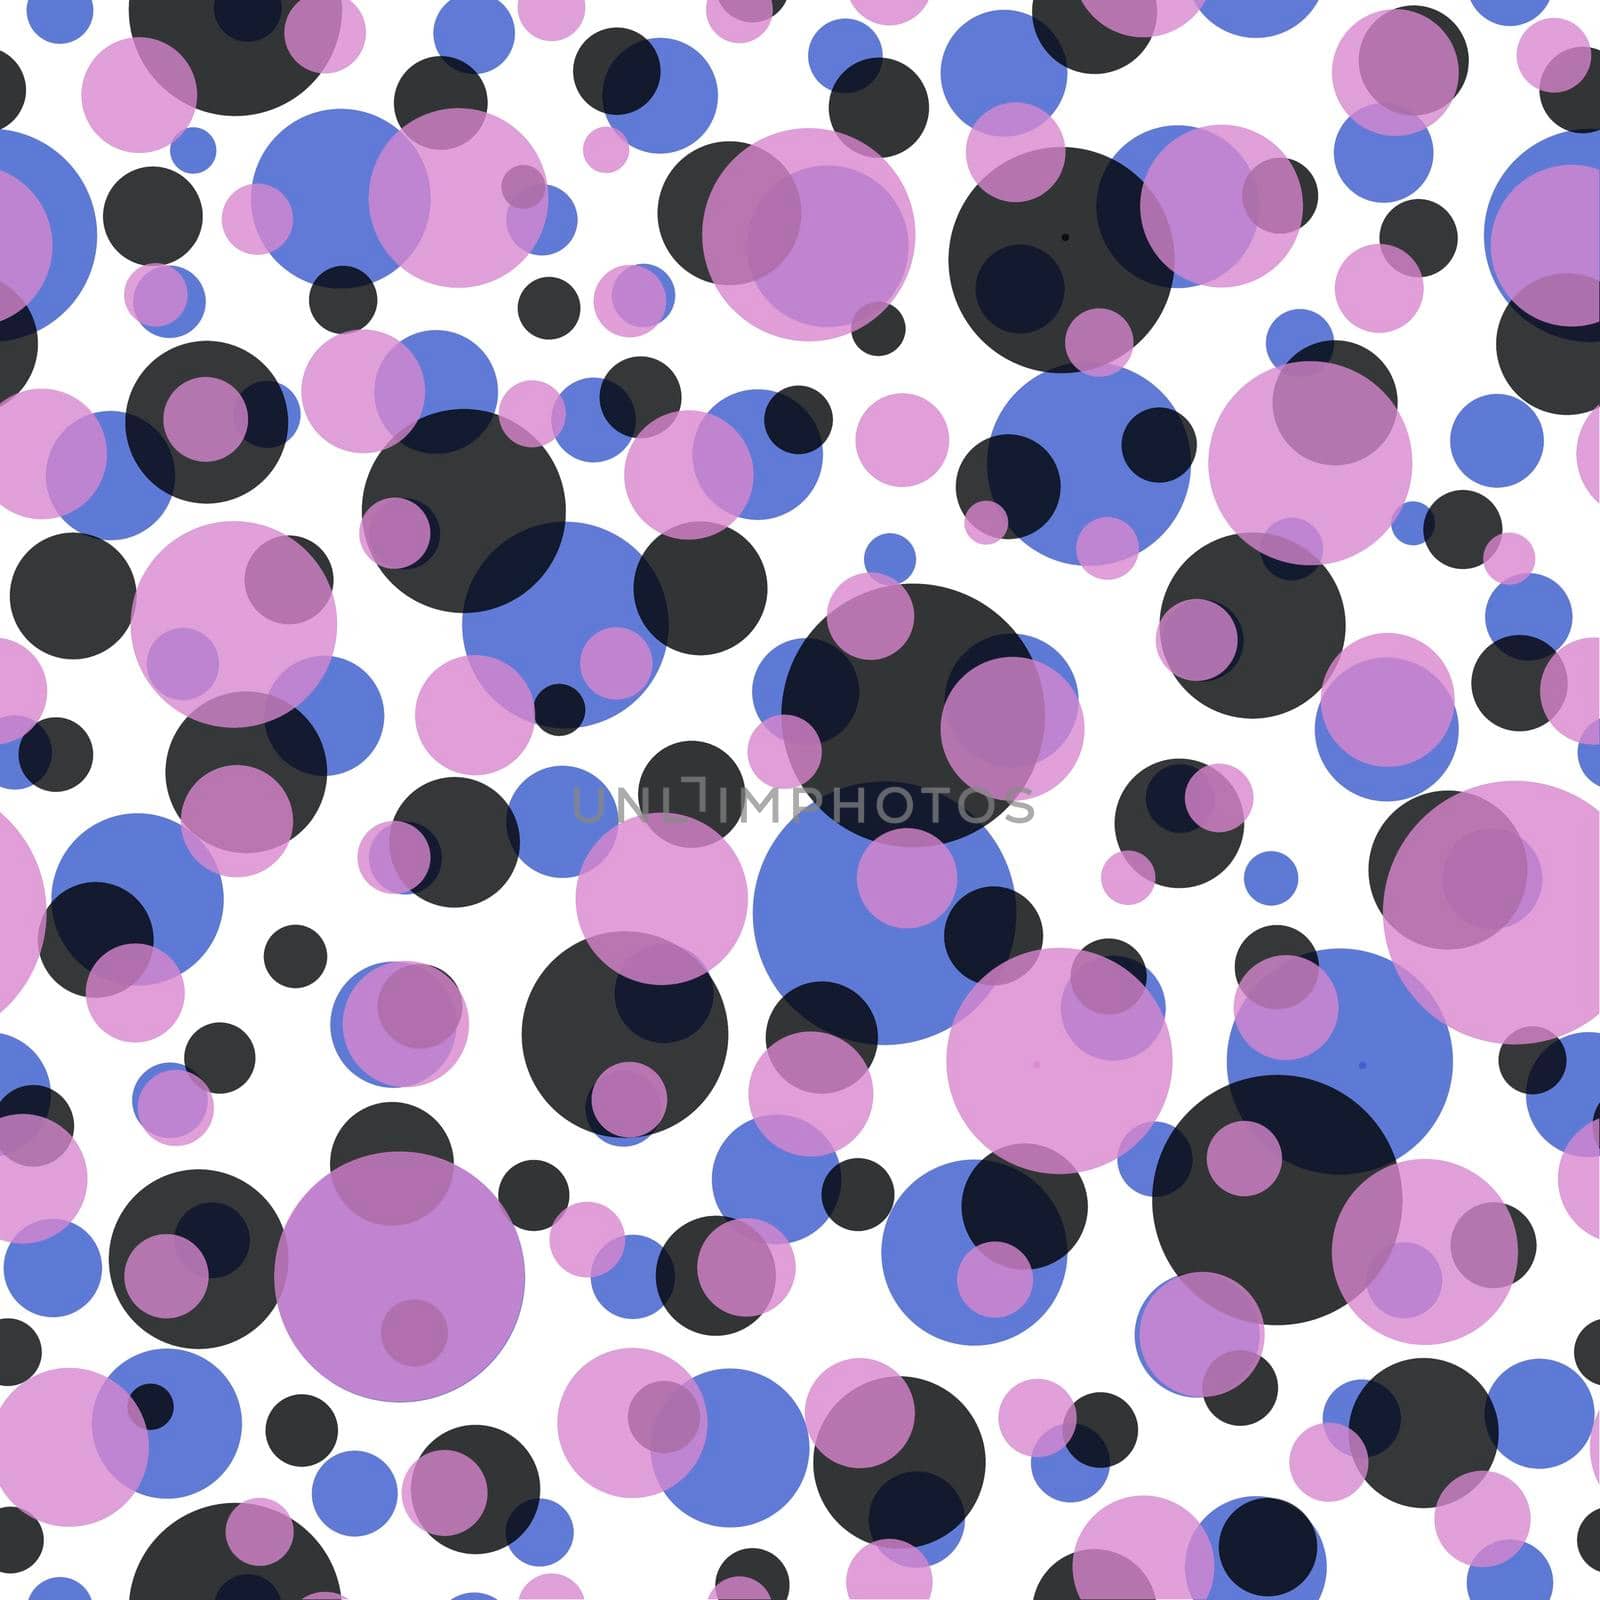 Abstract seamless pattern with colorful balls.Illustration of overlapping colorful dots pattern for background abstract.Polka dots ornament.Good for invitation,poster,card,flyer,banner,textile,fabric by Angelsmoon